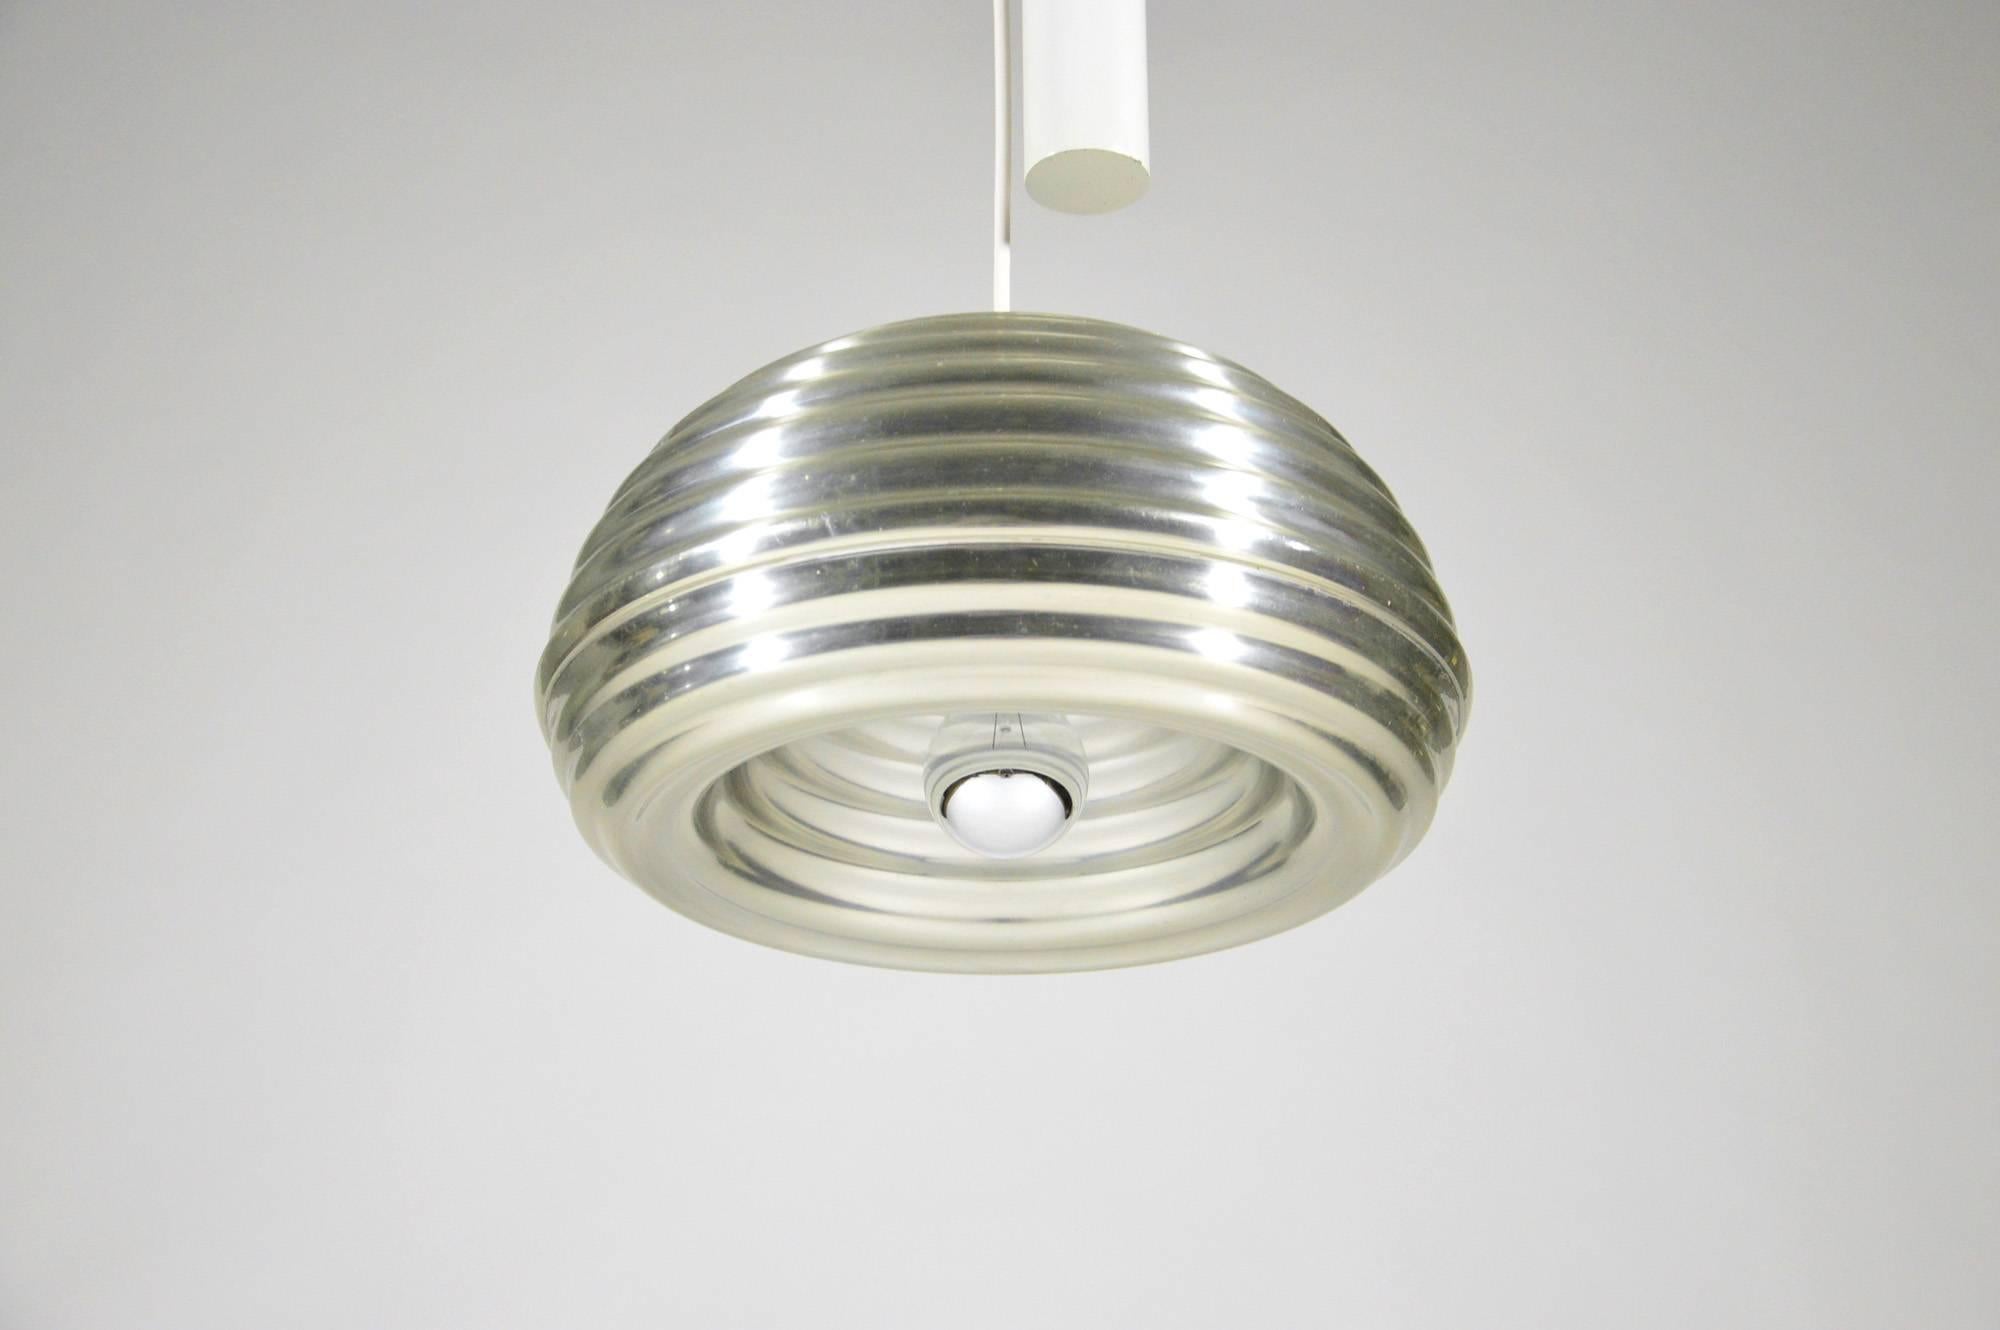 Turned Flos Splügen Bräu Pendant Lamp with Counterweight by A. and P. G. Castiglioni